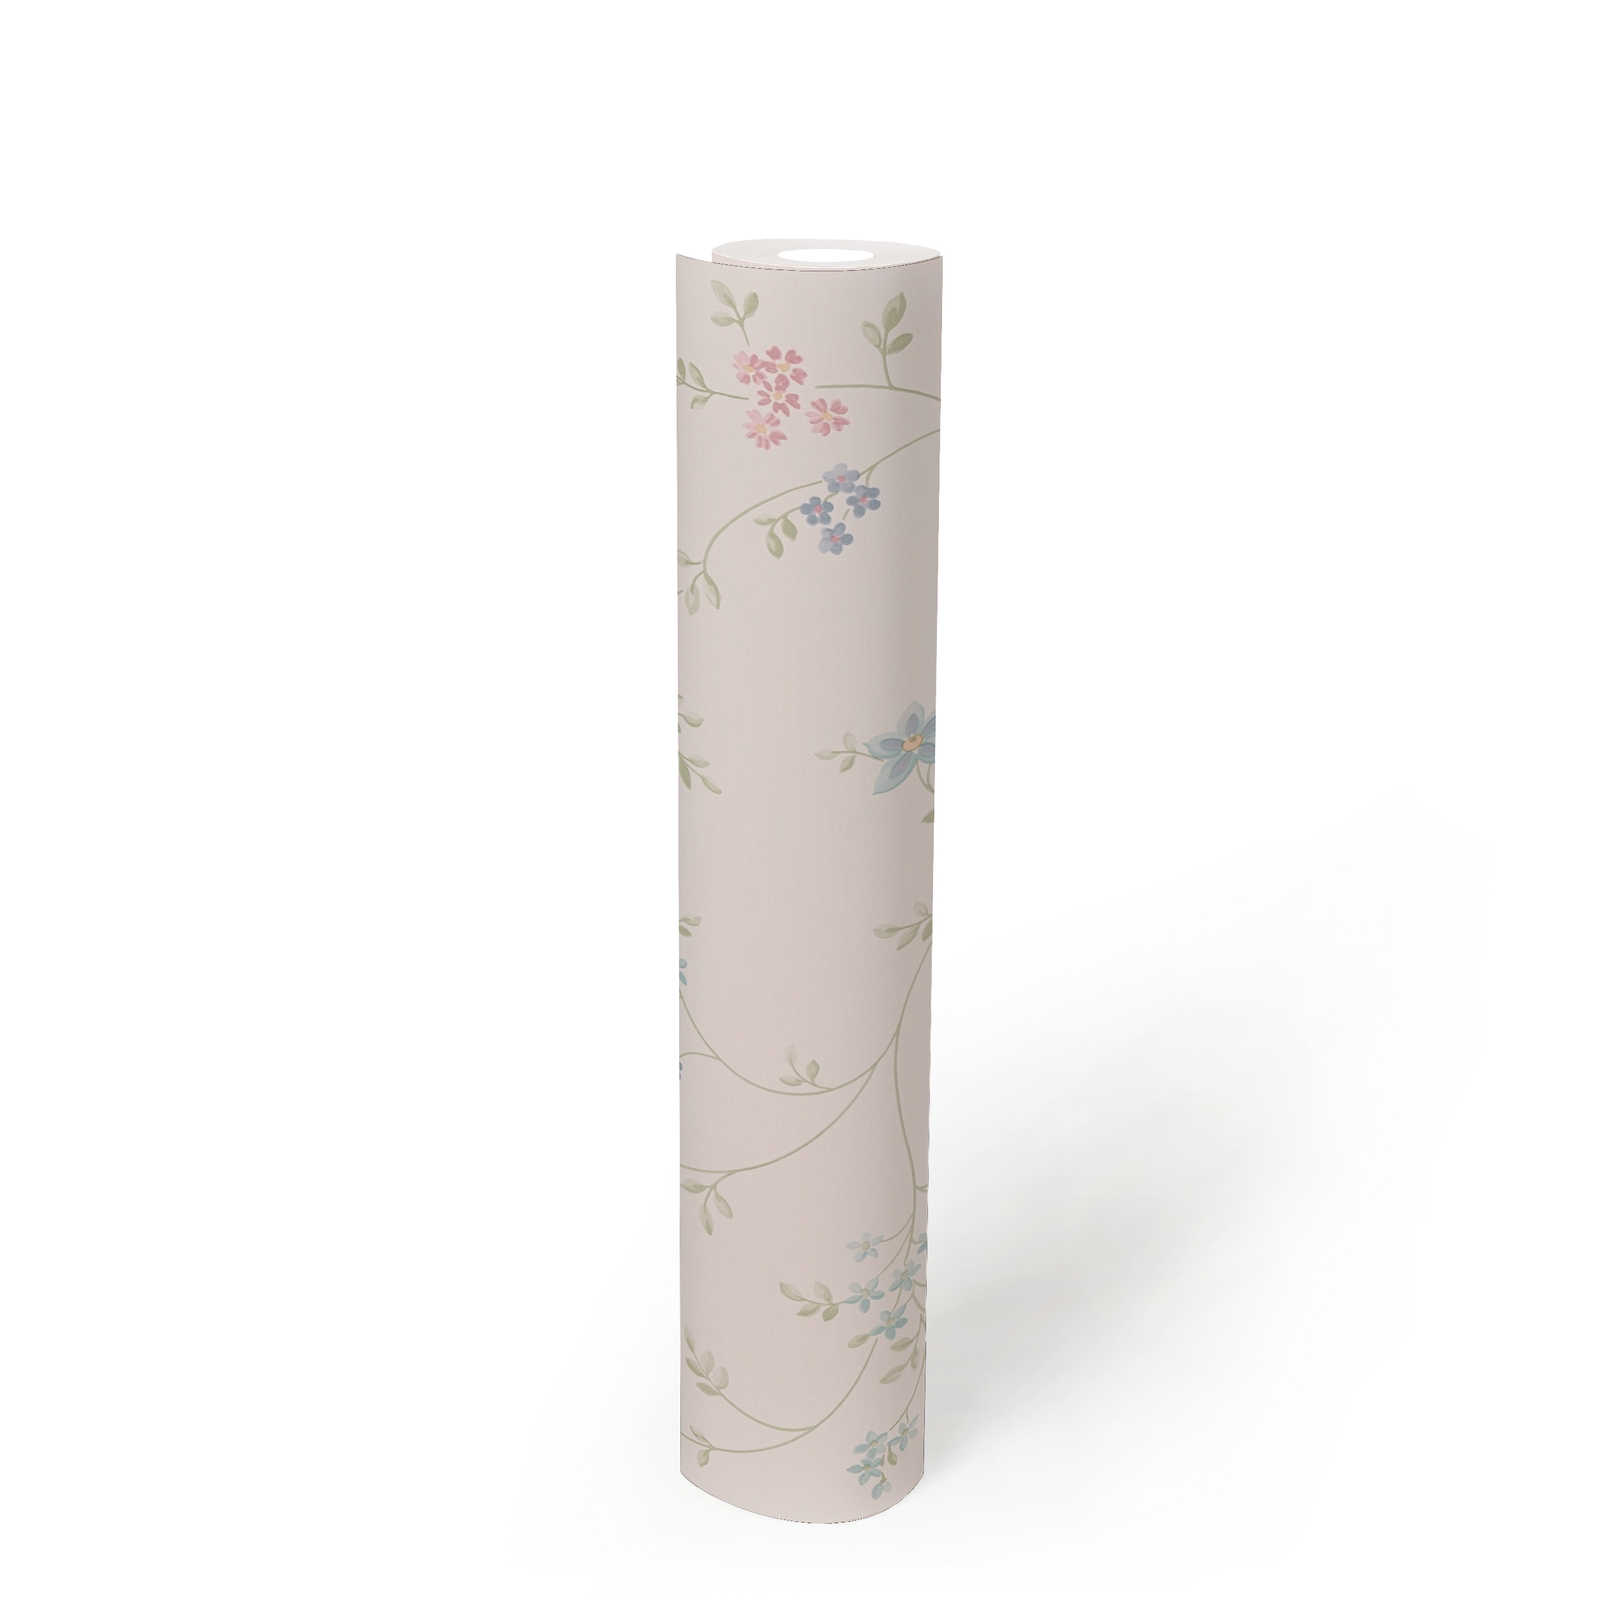             Floral wallpaper with vines in country style - cream, green, blue
        